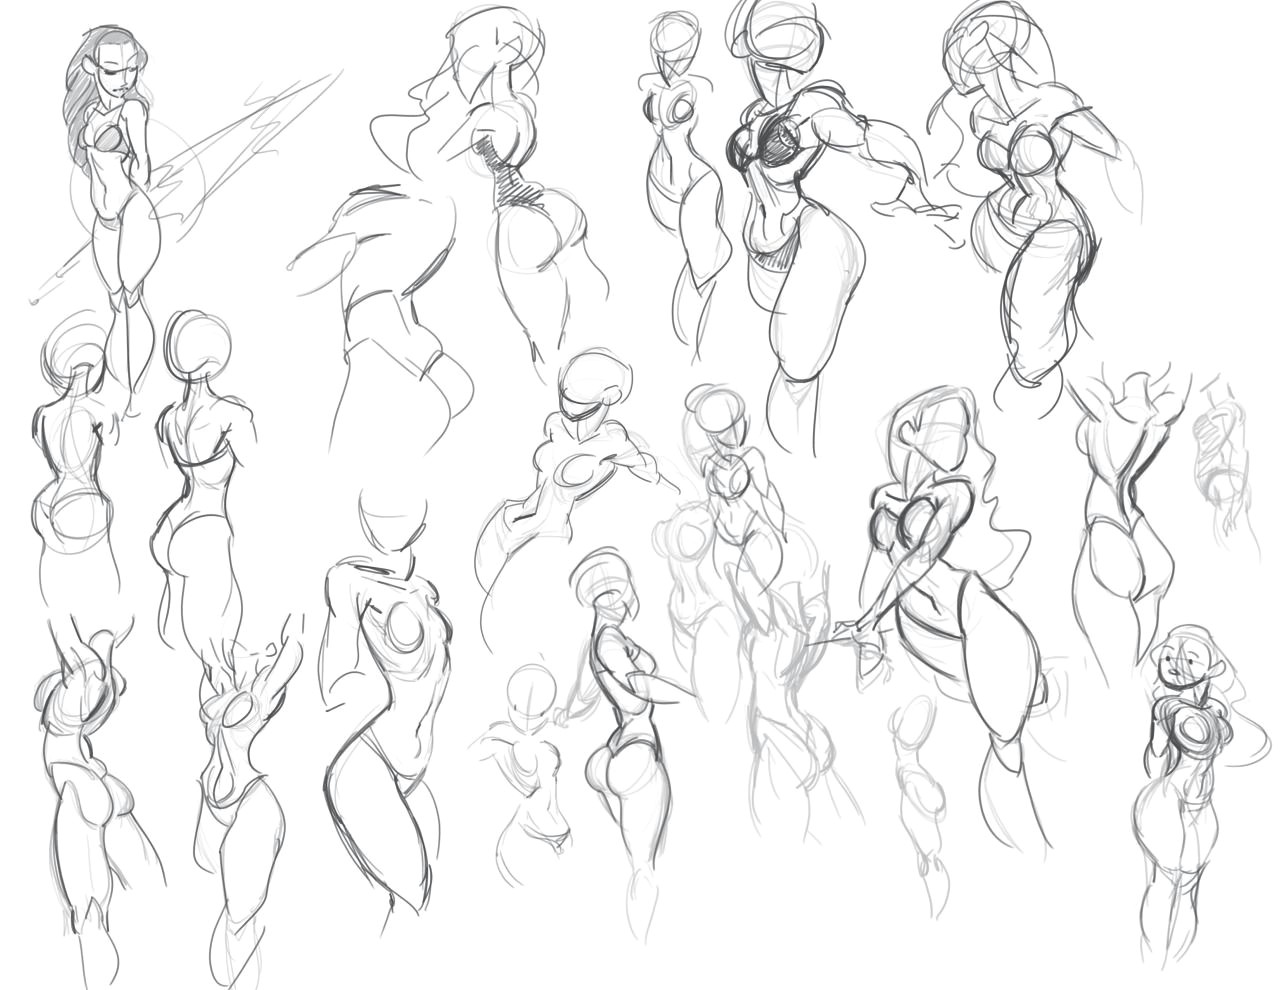 Drawing Poses Tumblr Pin by Darrell Vasquez On Gesture Drawing In 2018 Pinterest